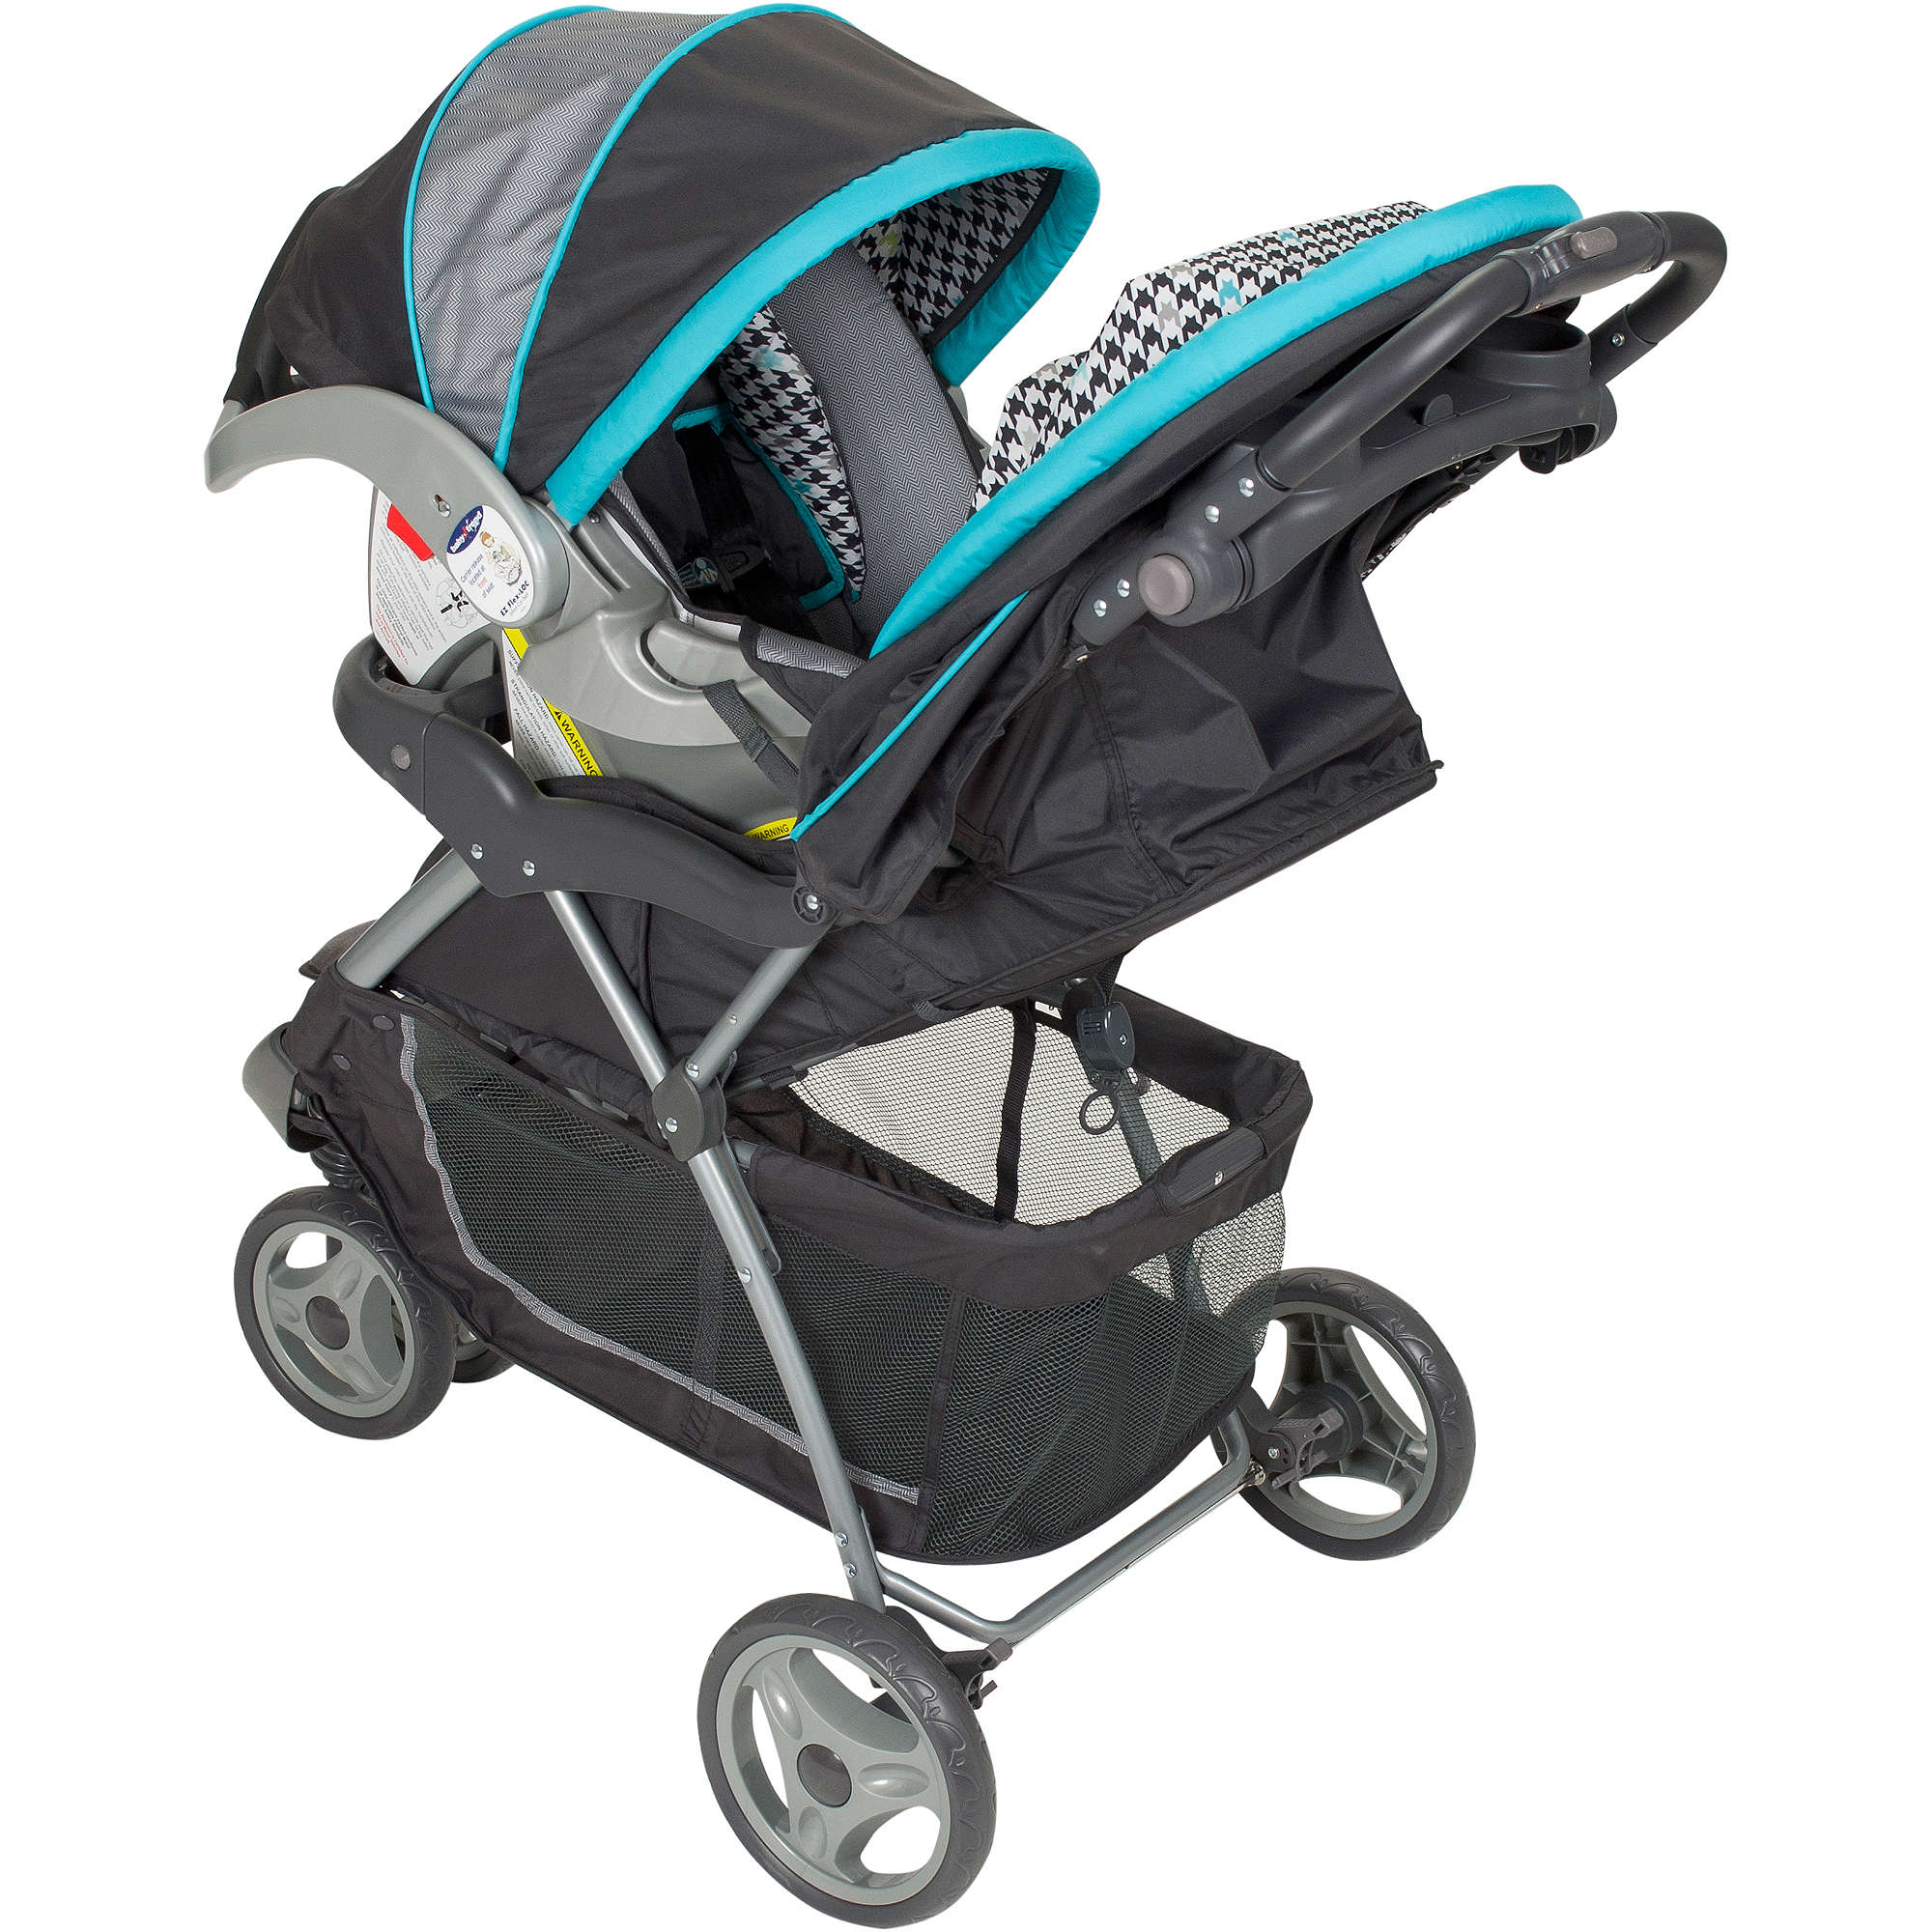 Baby Trend EZ Ride 5 Travel System, Houndstooth Blue - image 3 of 6